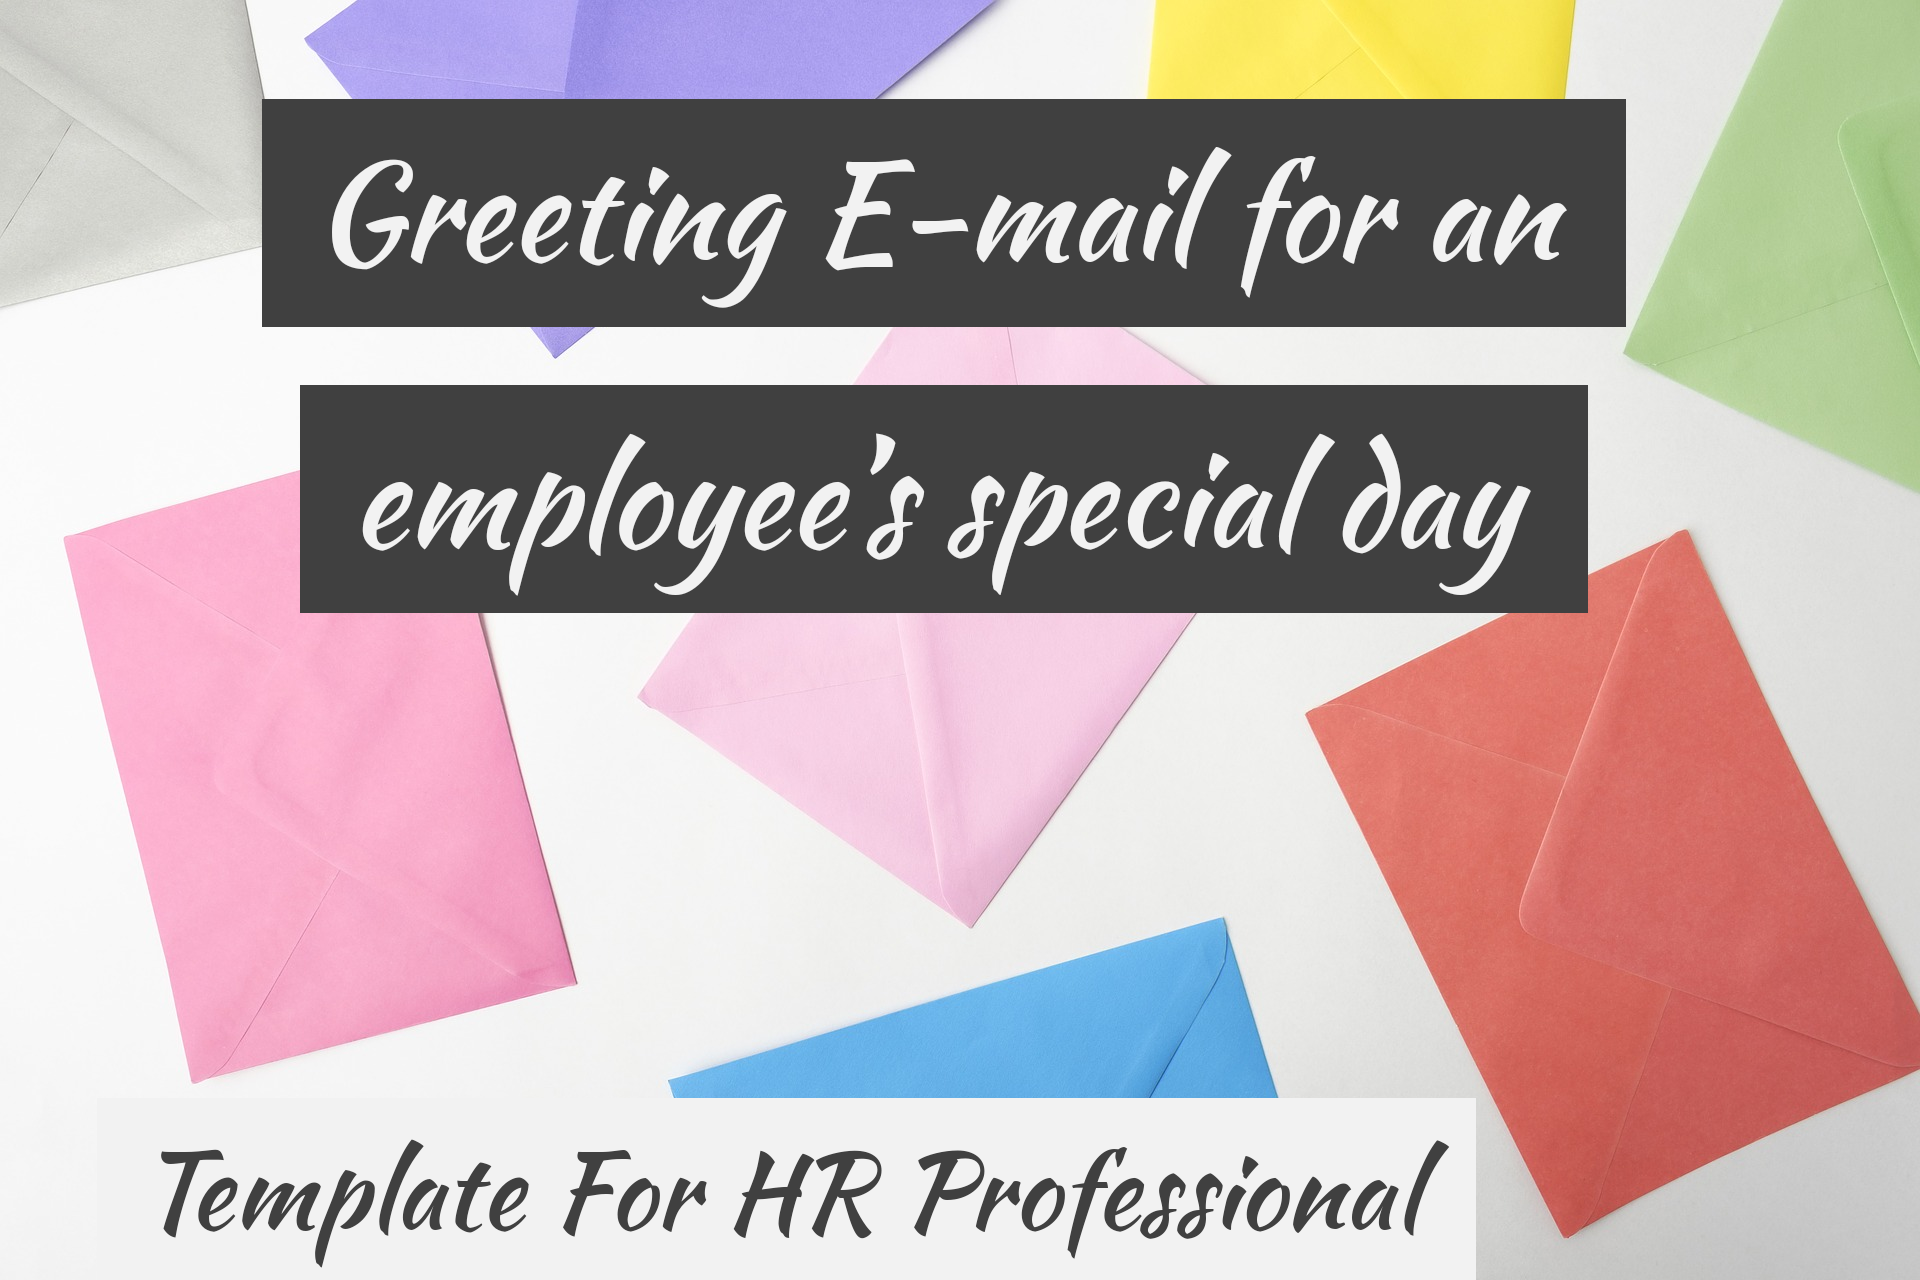 Greeting email for an employee's special day